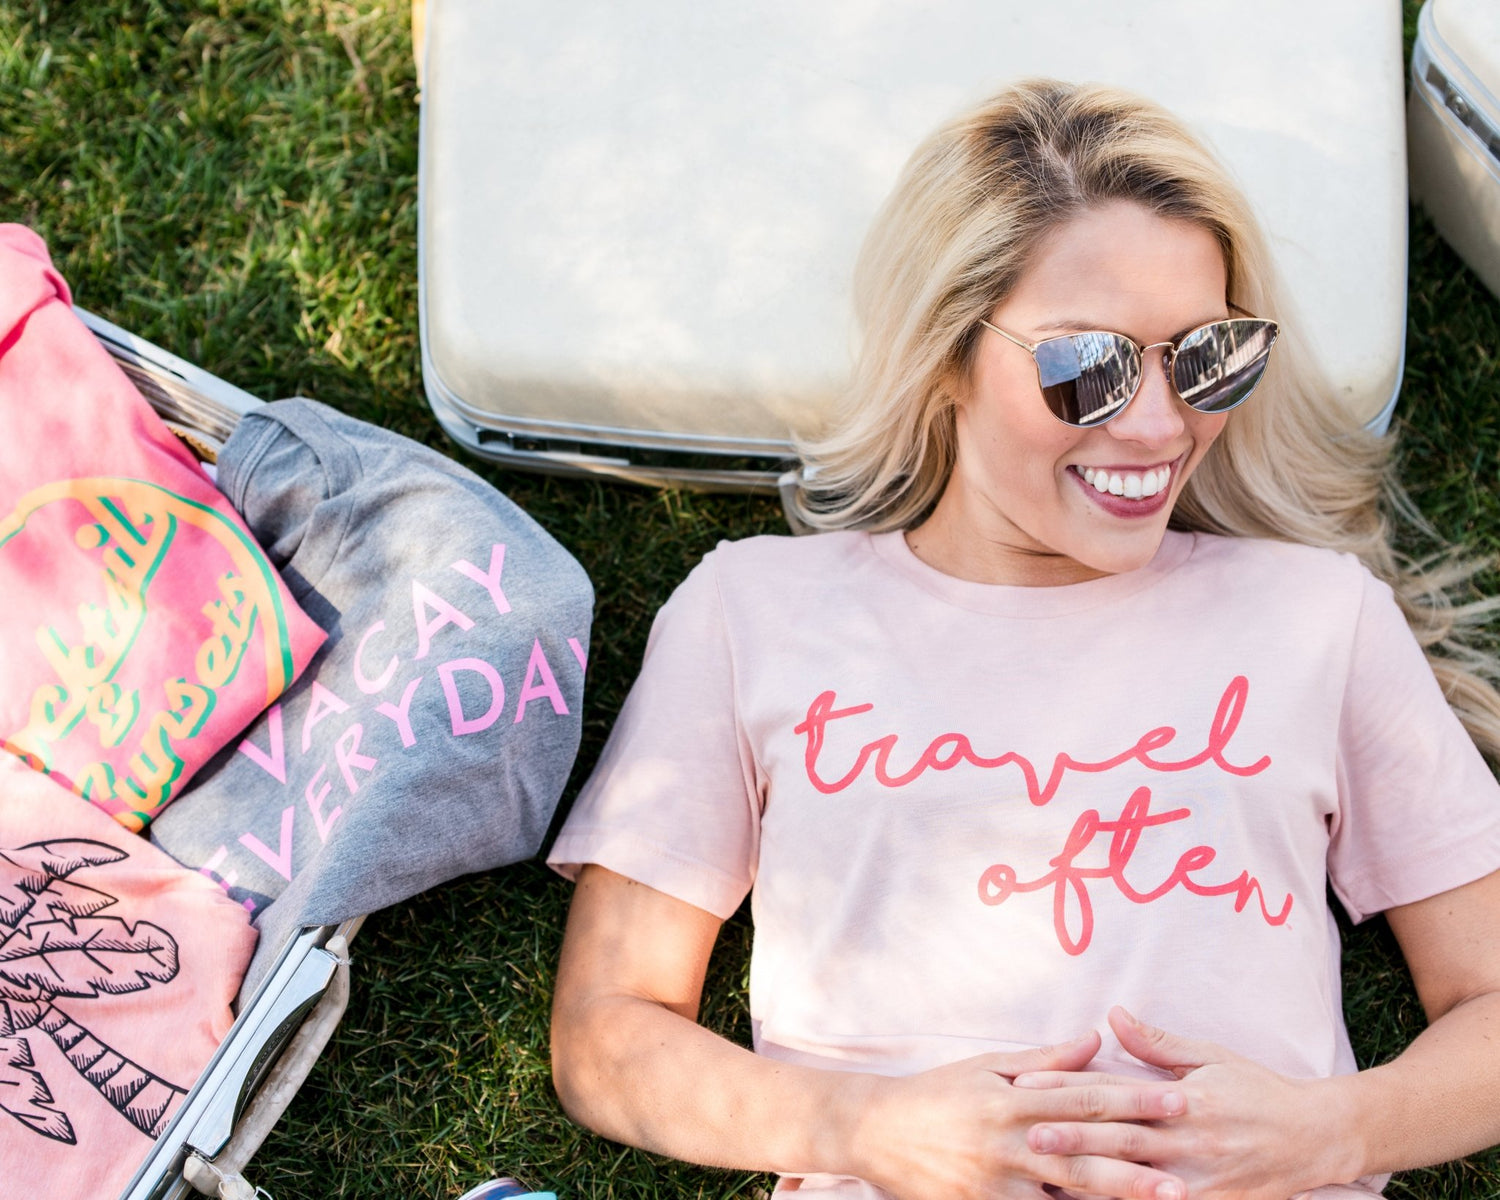 Women's Vacation T-Shirts and Road Trip Graphic Tees